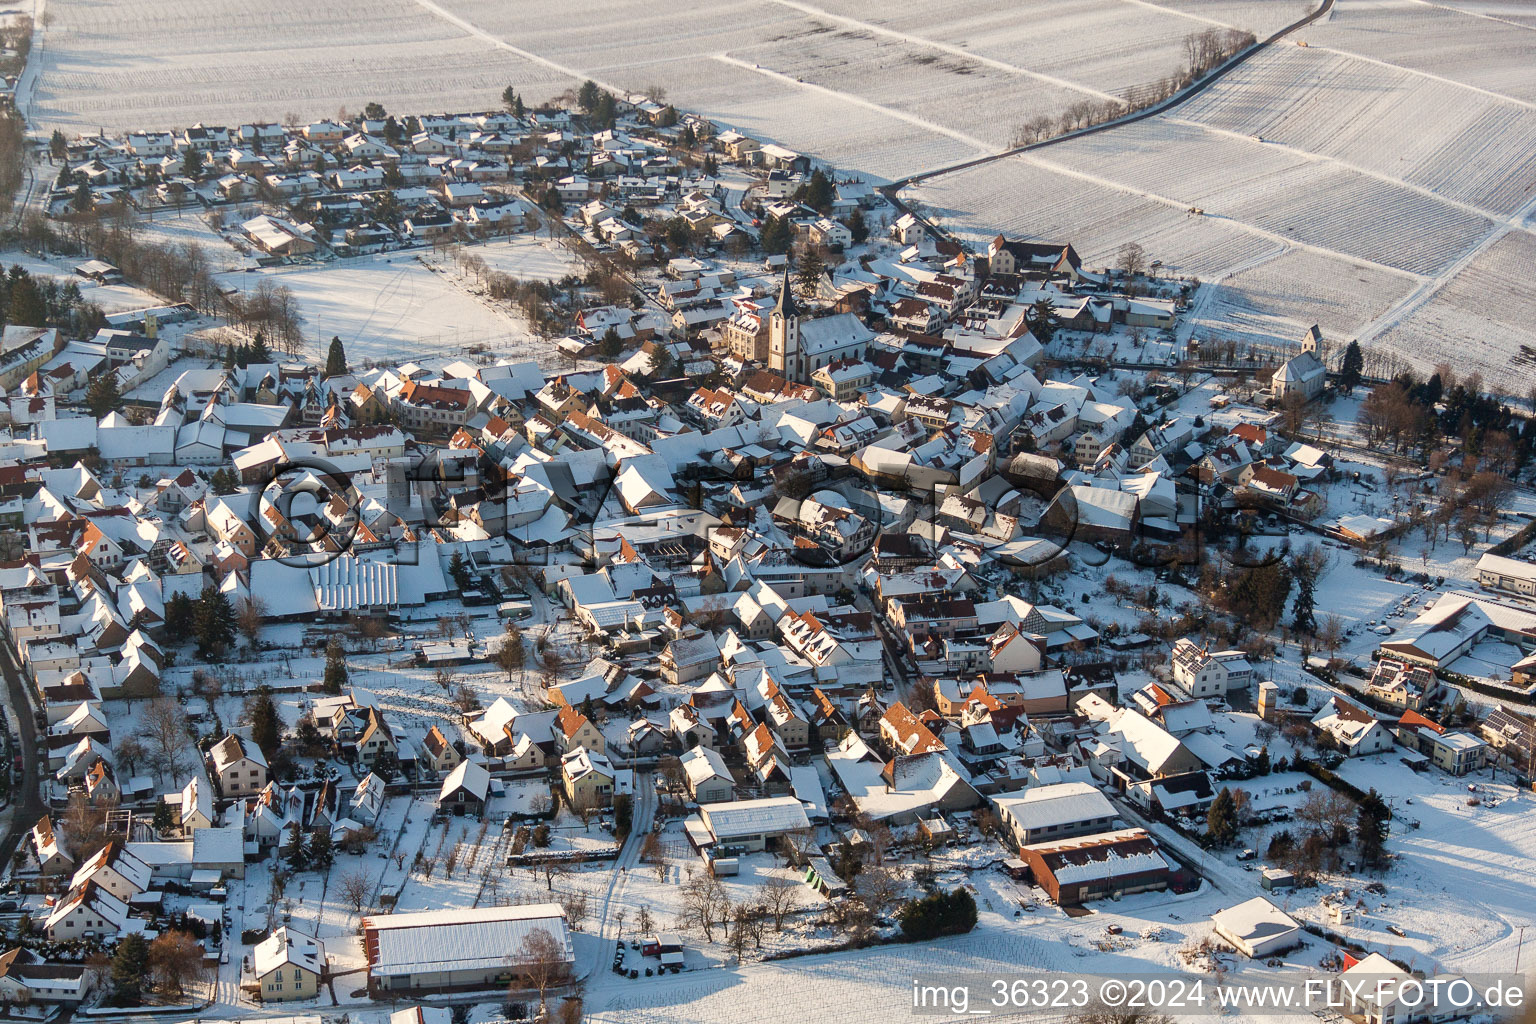 Aerial photograpy of Wintry snowy Village - view on the edge of agricultural fields and farmland in the district Moerzheim in Landau in der Pfalz in the state Rhineland-Palatinate, Germany